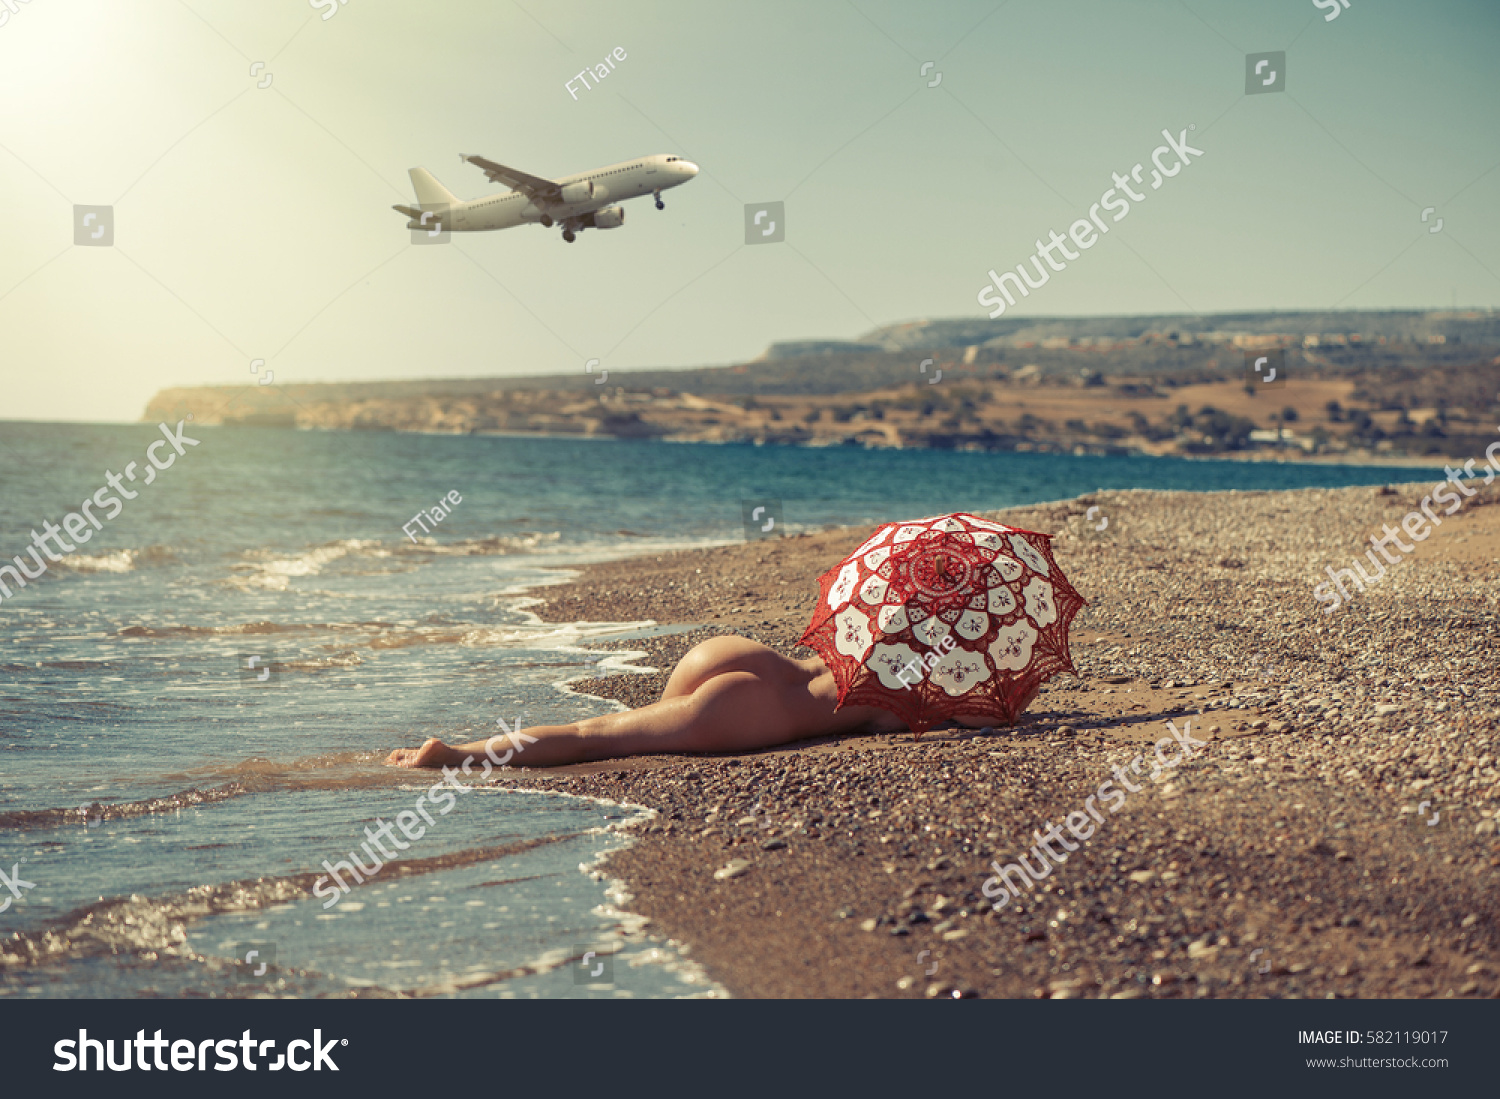 girl laying naked in beach